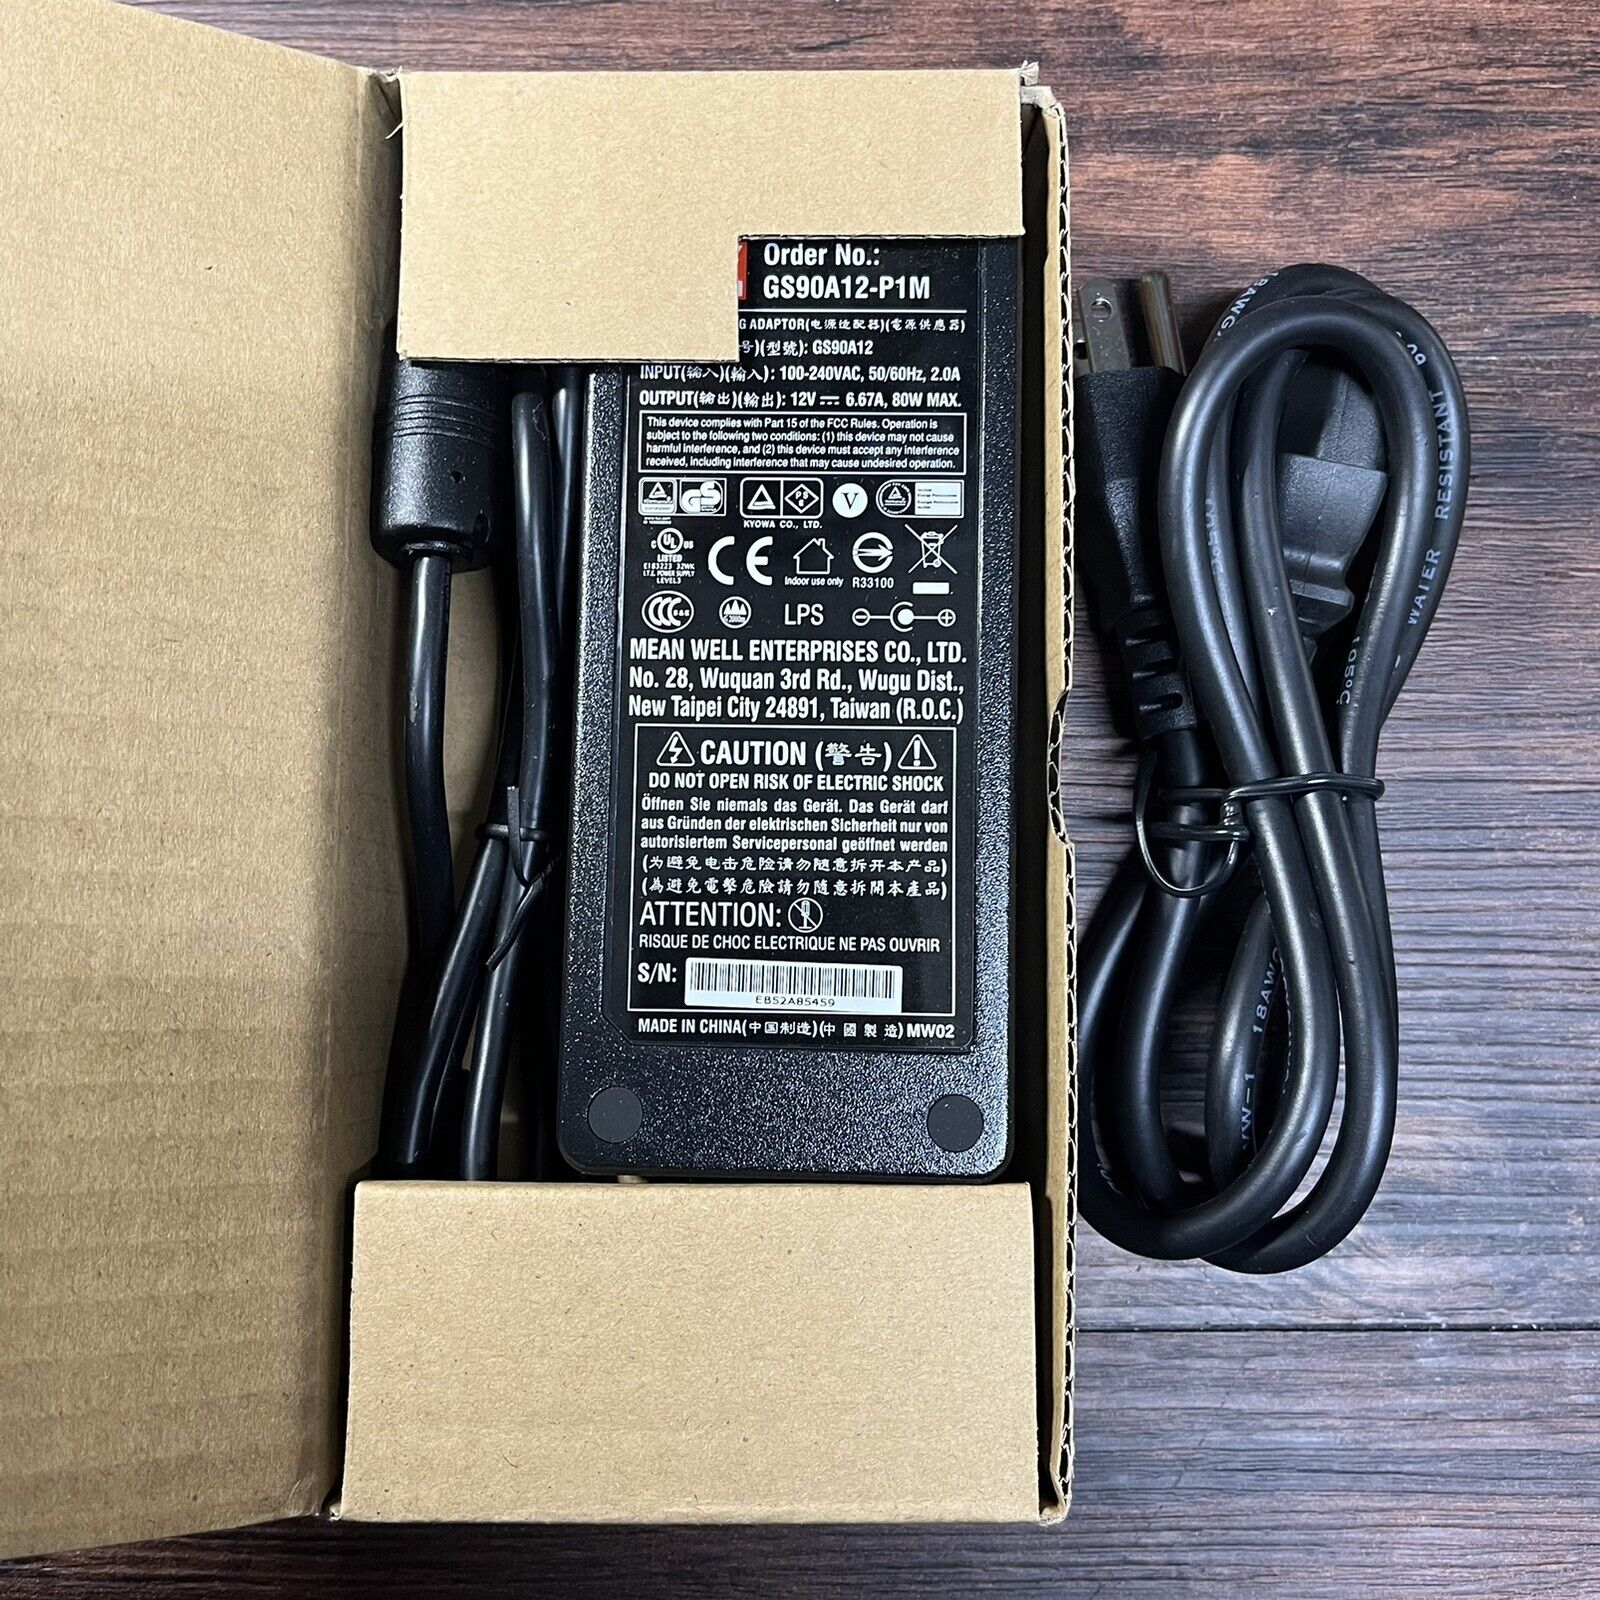 MEANWELL 12 Volt DC Switching Power Supply GS90A12-P1M AC Adapter Compatible Brand: Universal Connection Split/Duplica